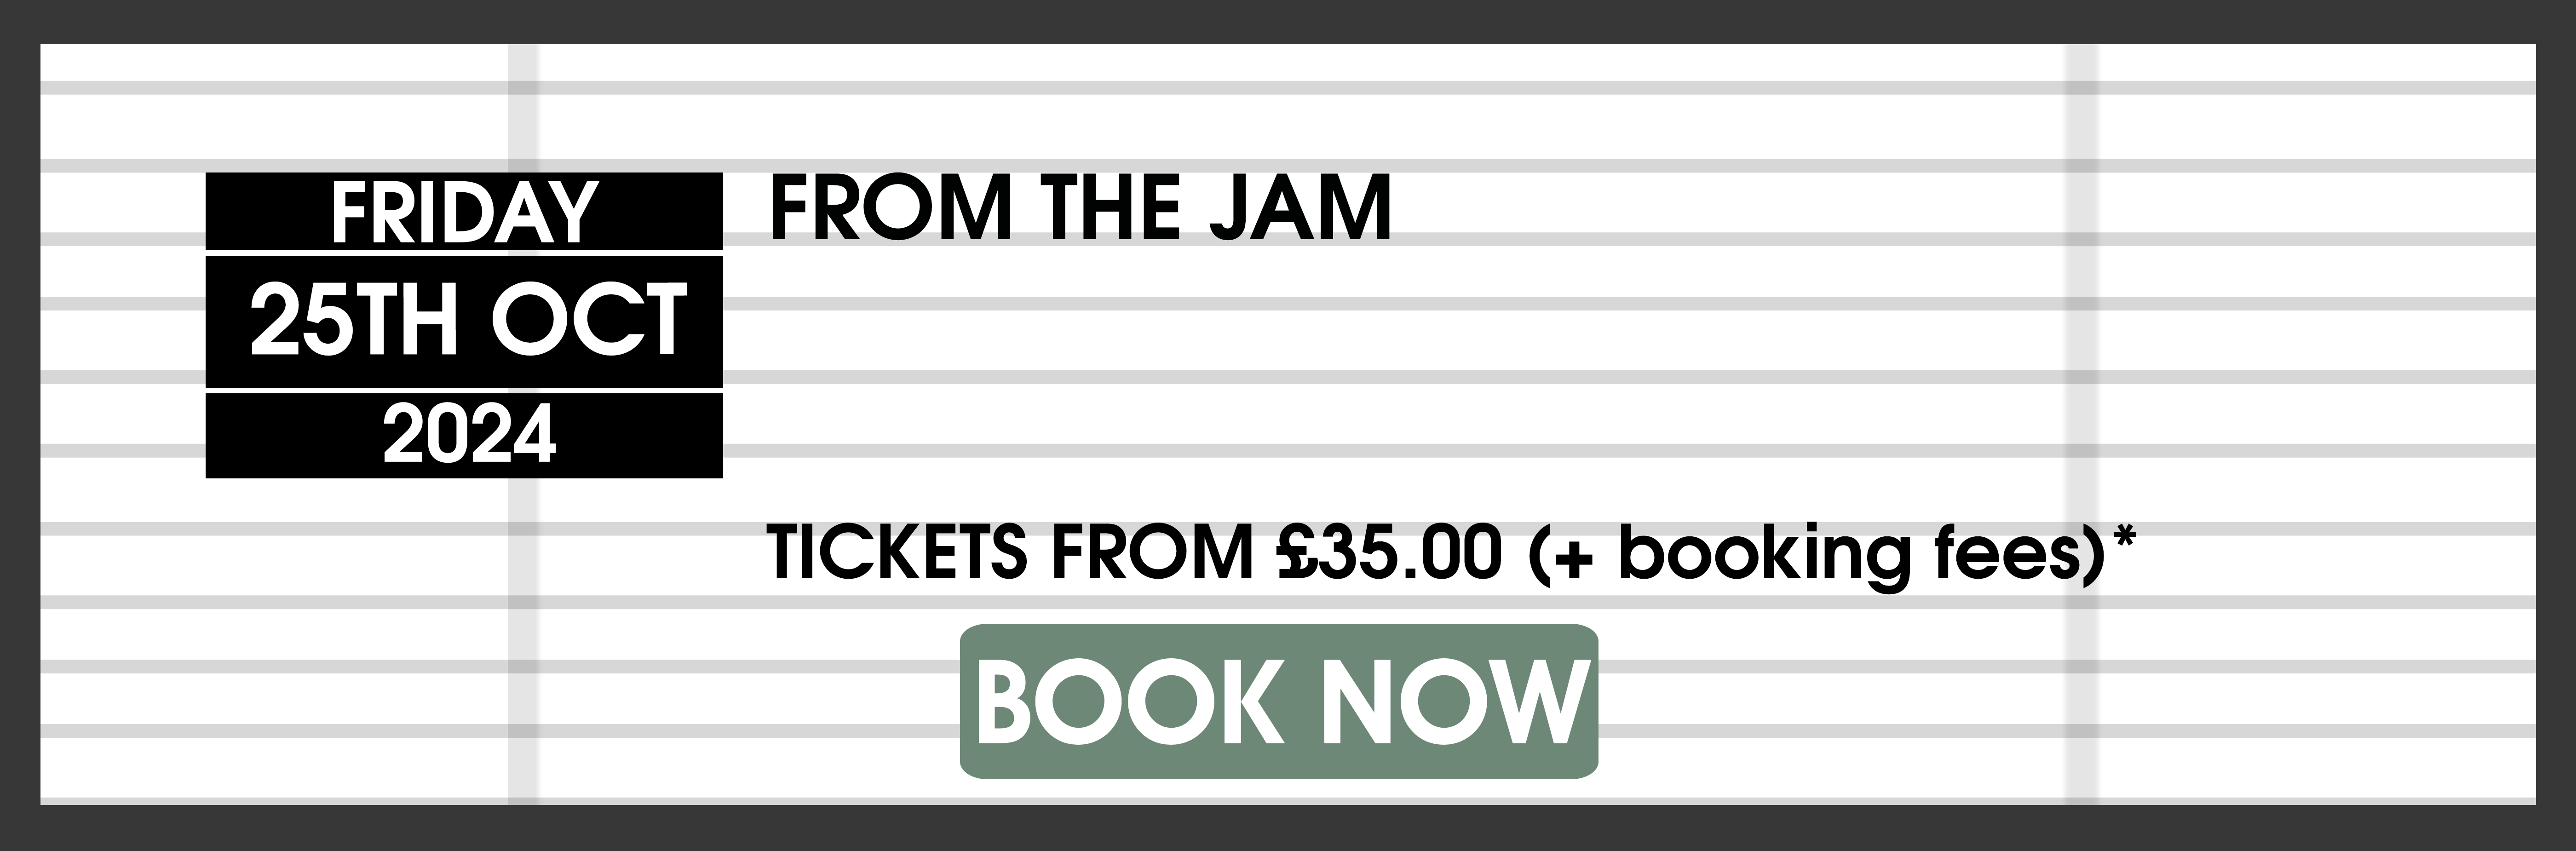 25.10.24 From the Jam BOOK NOW